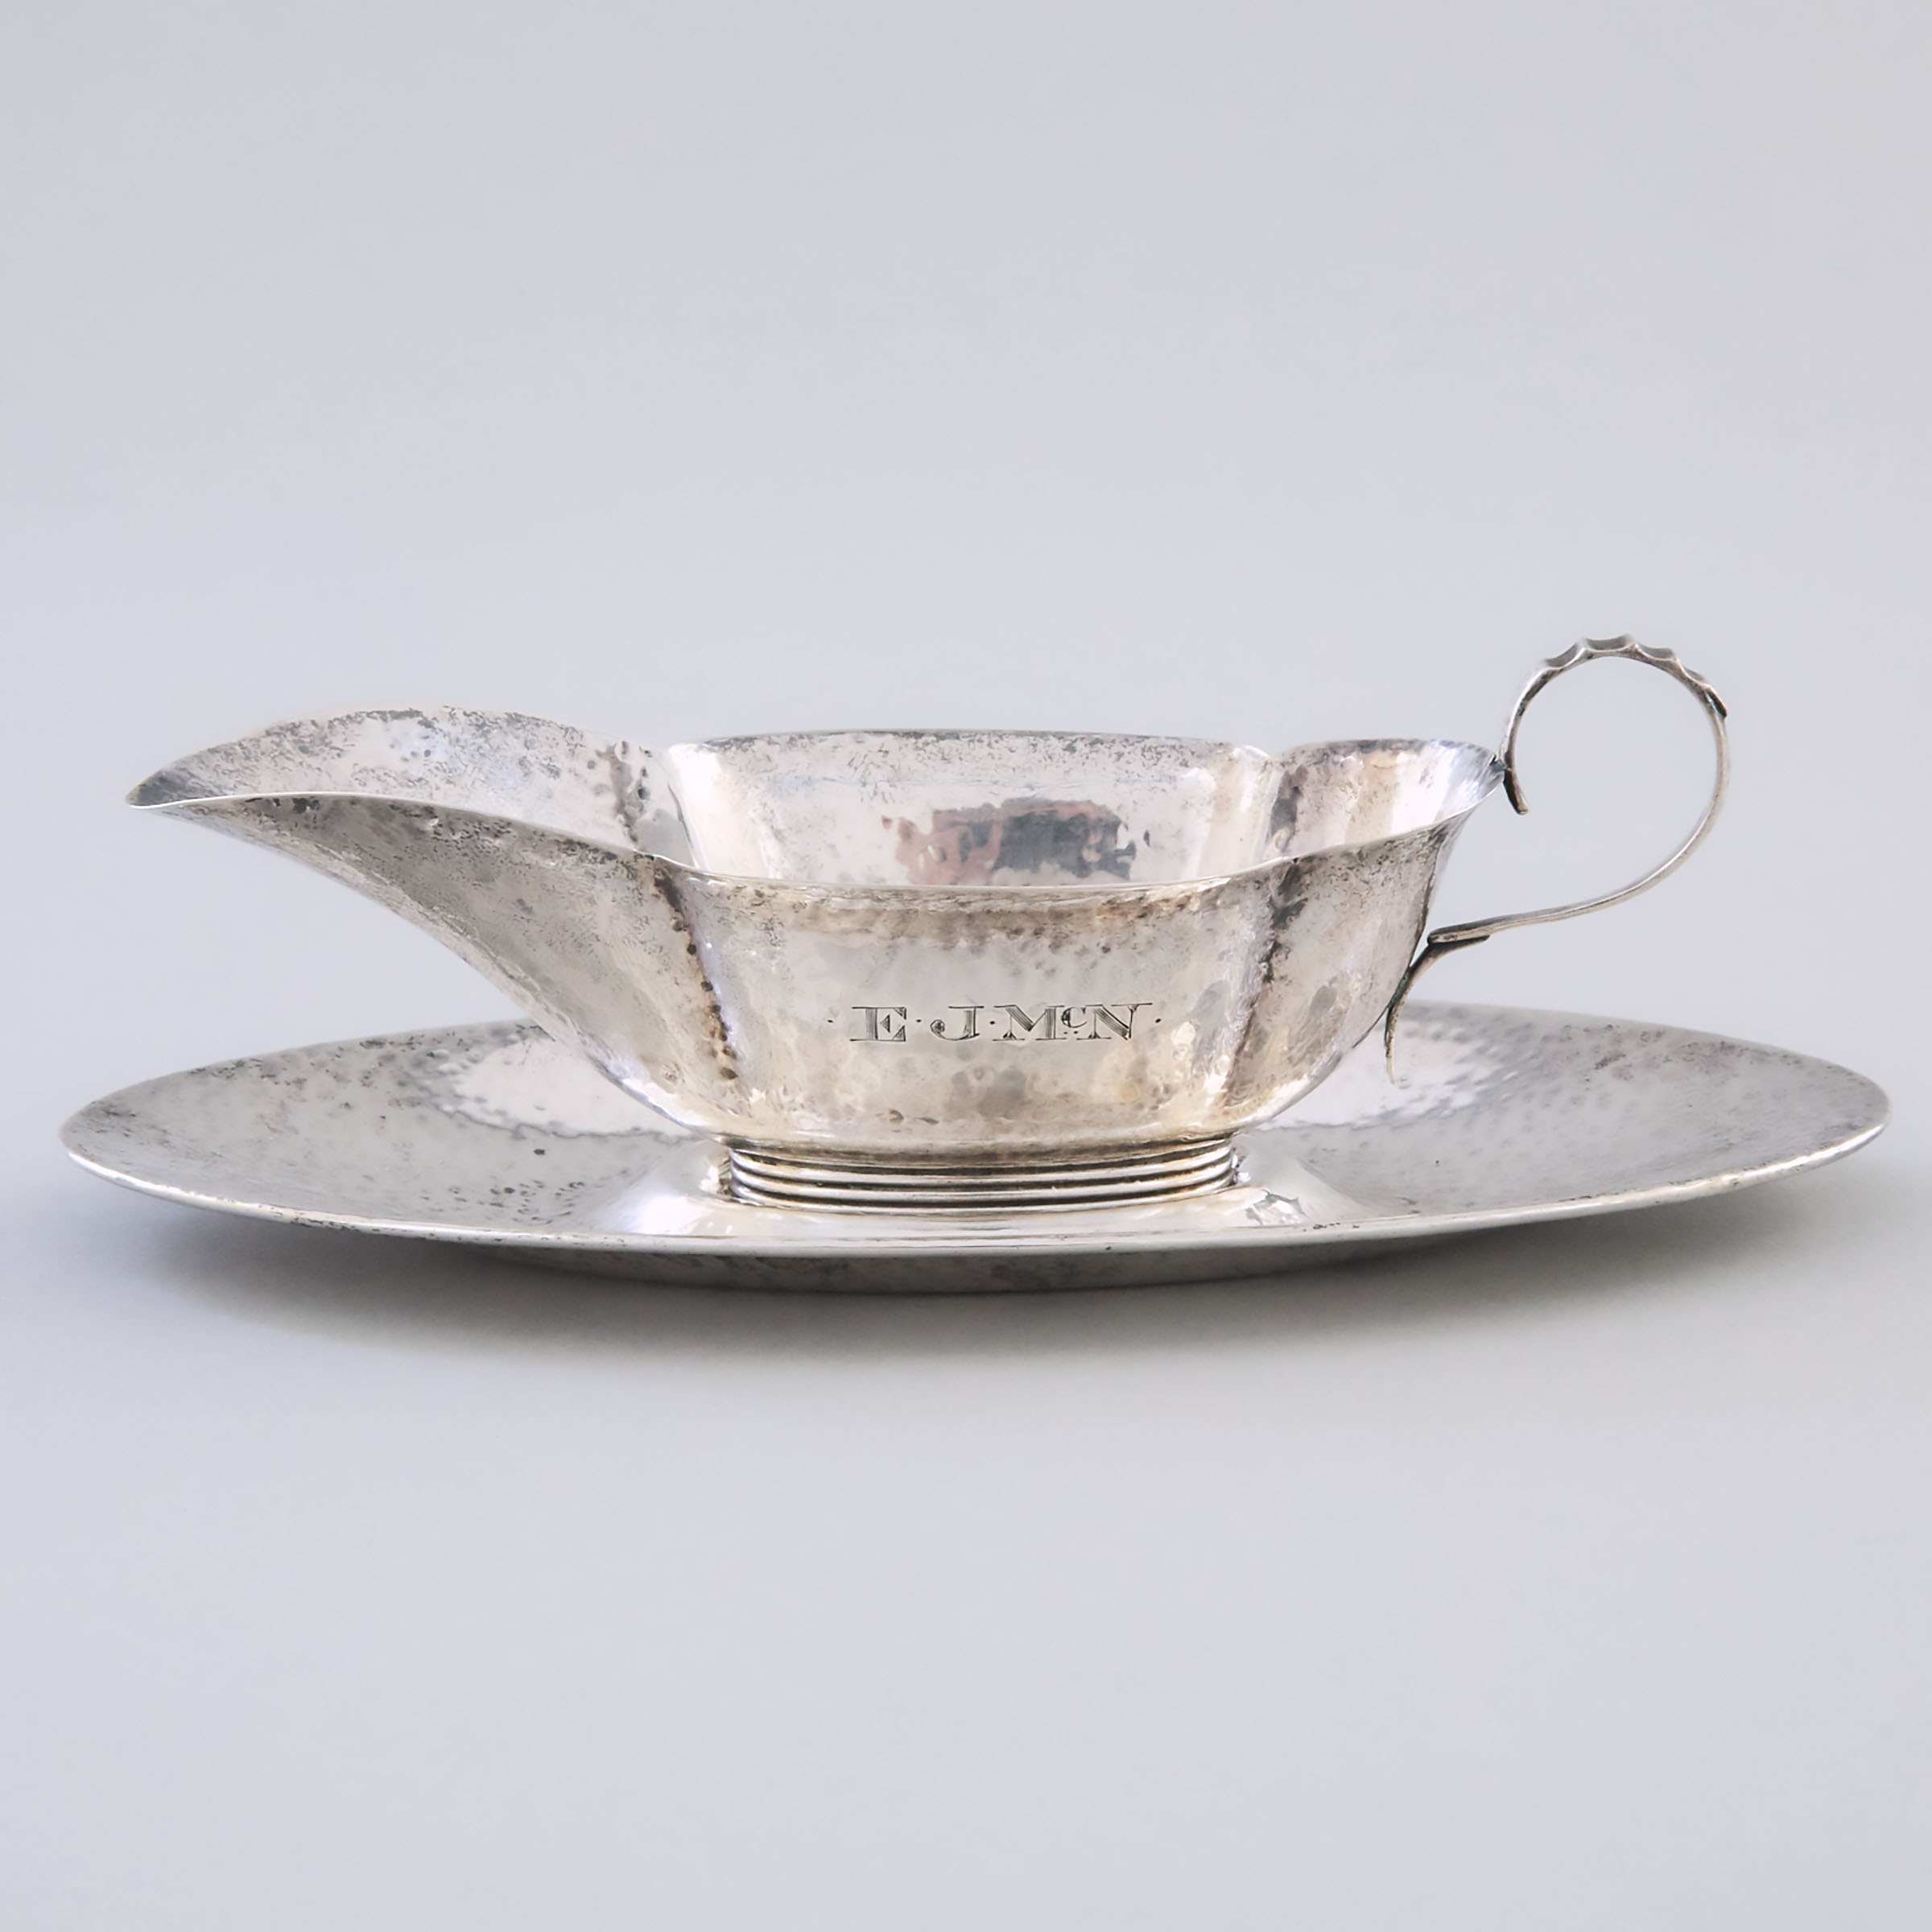 American Silver Small Sauce Boat and Stand, Gorham Mfg. Co., Providence, R.I., 1914